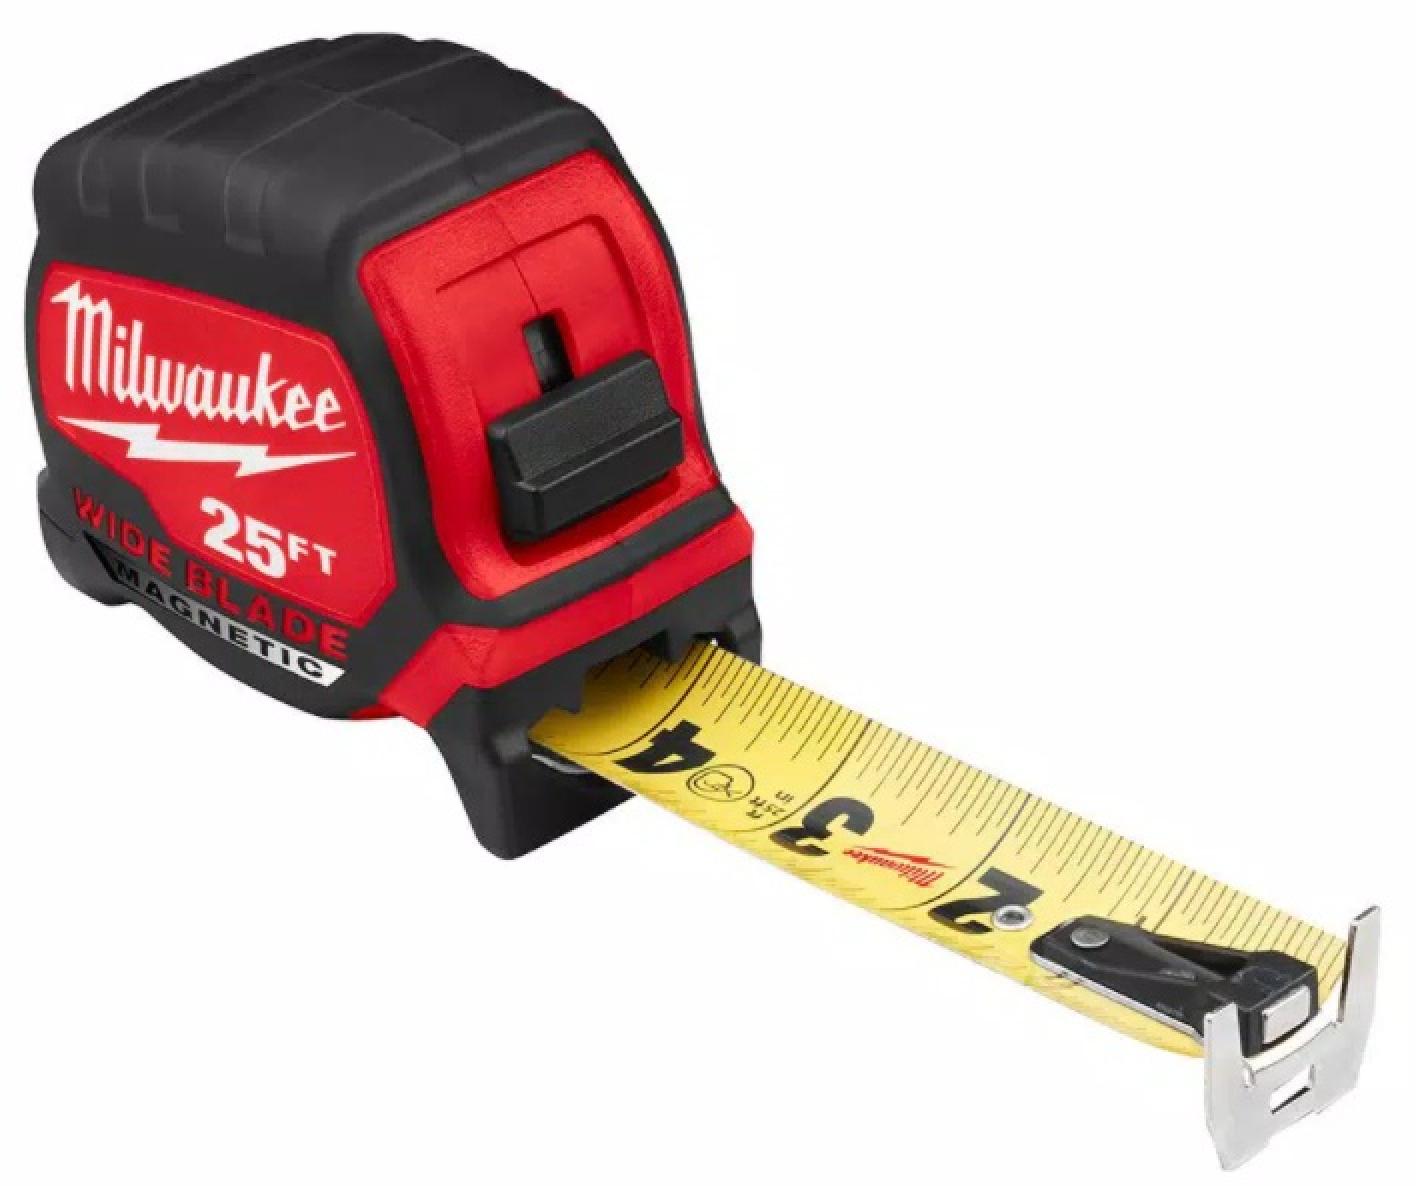 Milwaukee 25 Ft. Wide Blade Magnetic Tape Measure